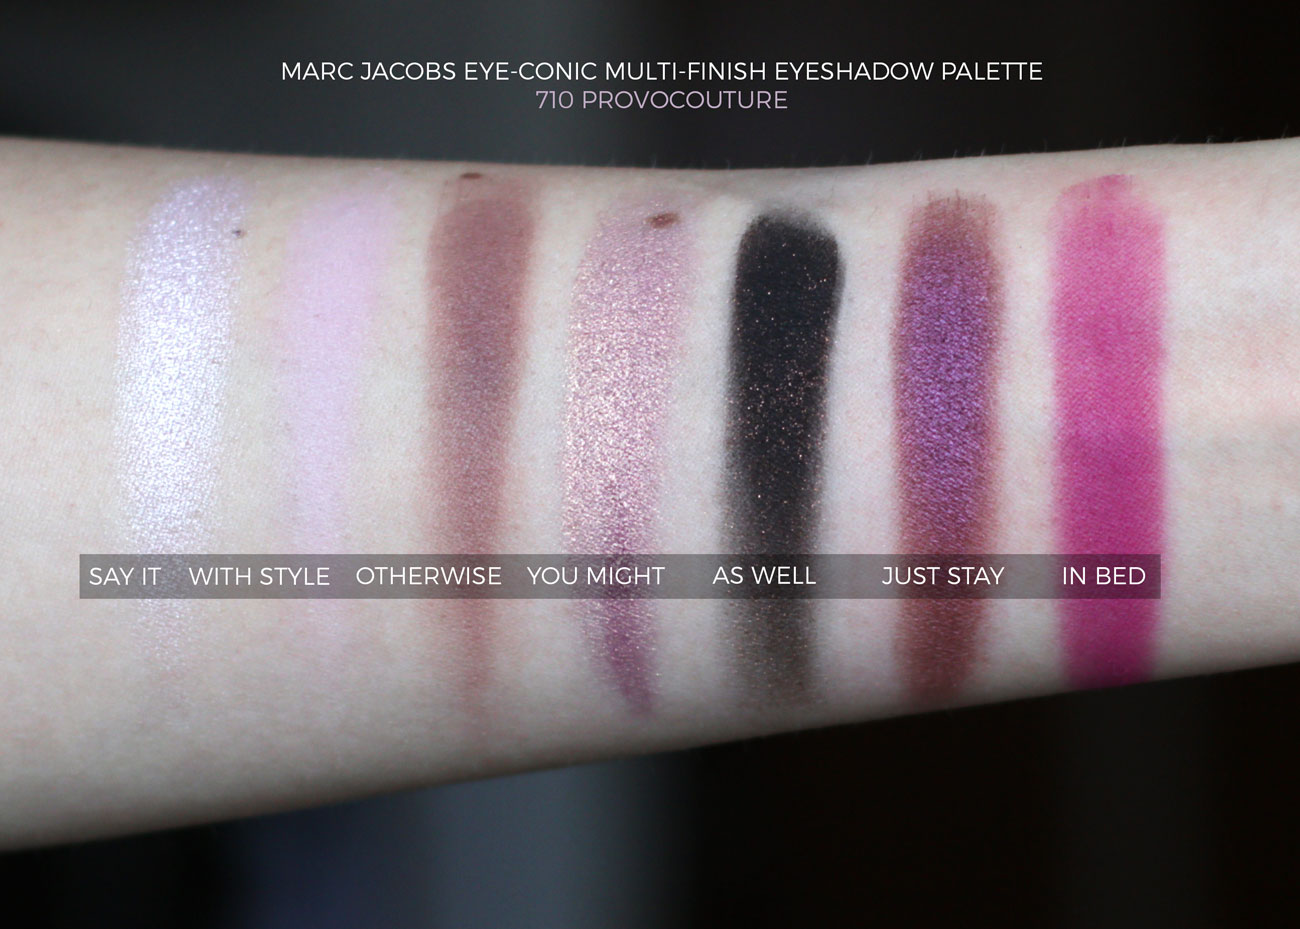 Marc Jacobs Eye-Conic Multi-Finish Eyeshadow Palette 710 Provocouture Swatches